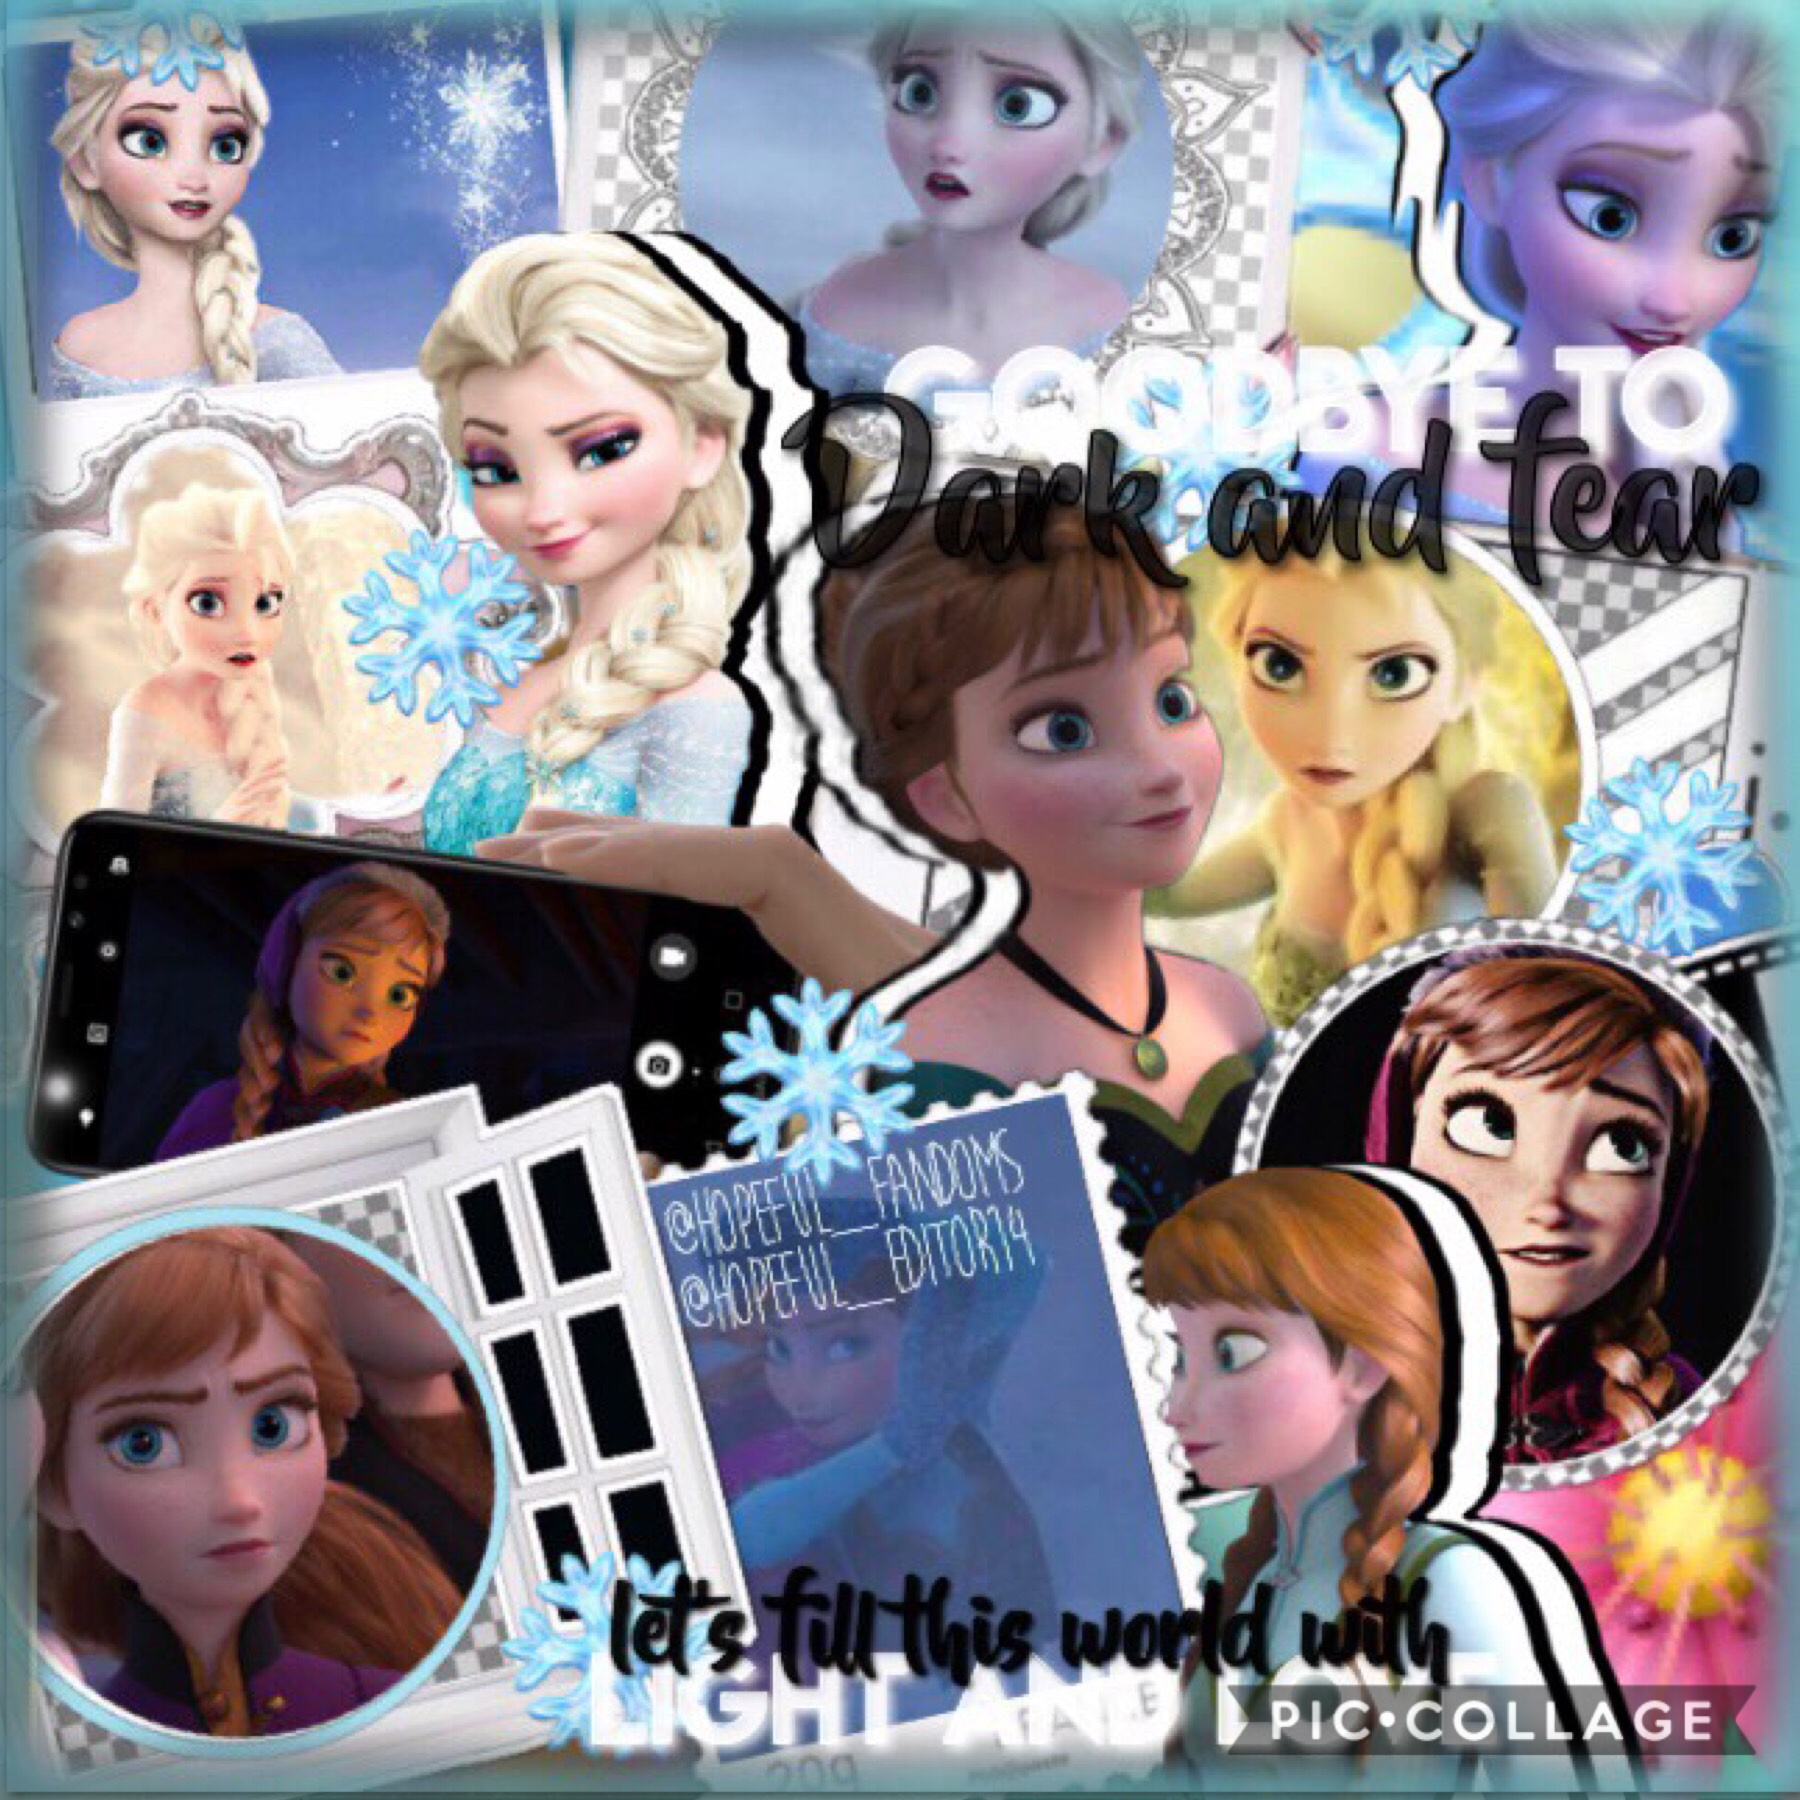 Hey! (tap)
I’m SO excited for Frozen 2!!!!!
What do you think of this collage? I’m not sure about it. Enter my icon contest if you have time!